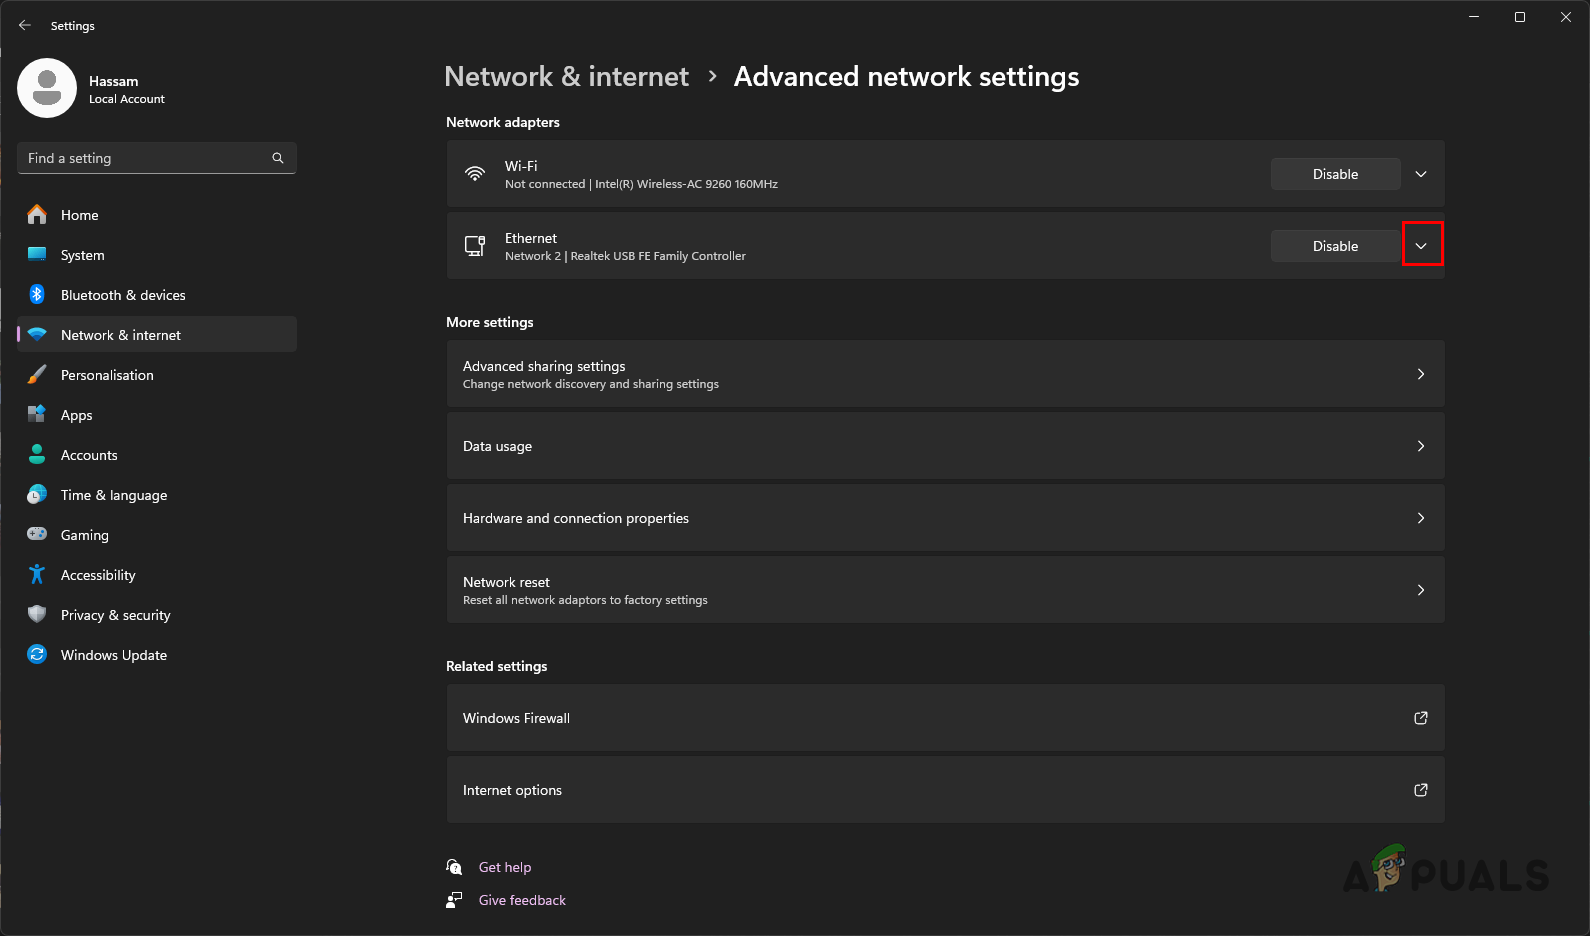 Revealing Additional Network Adapter Options